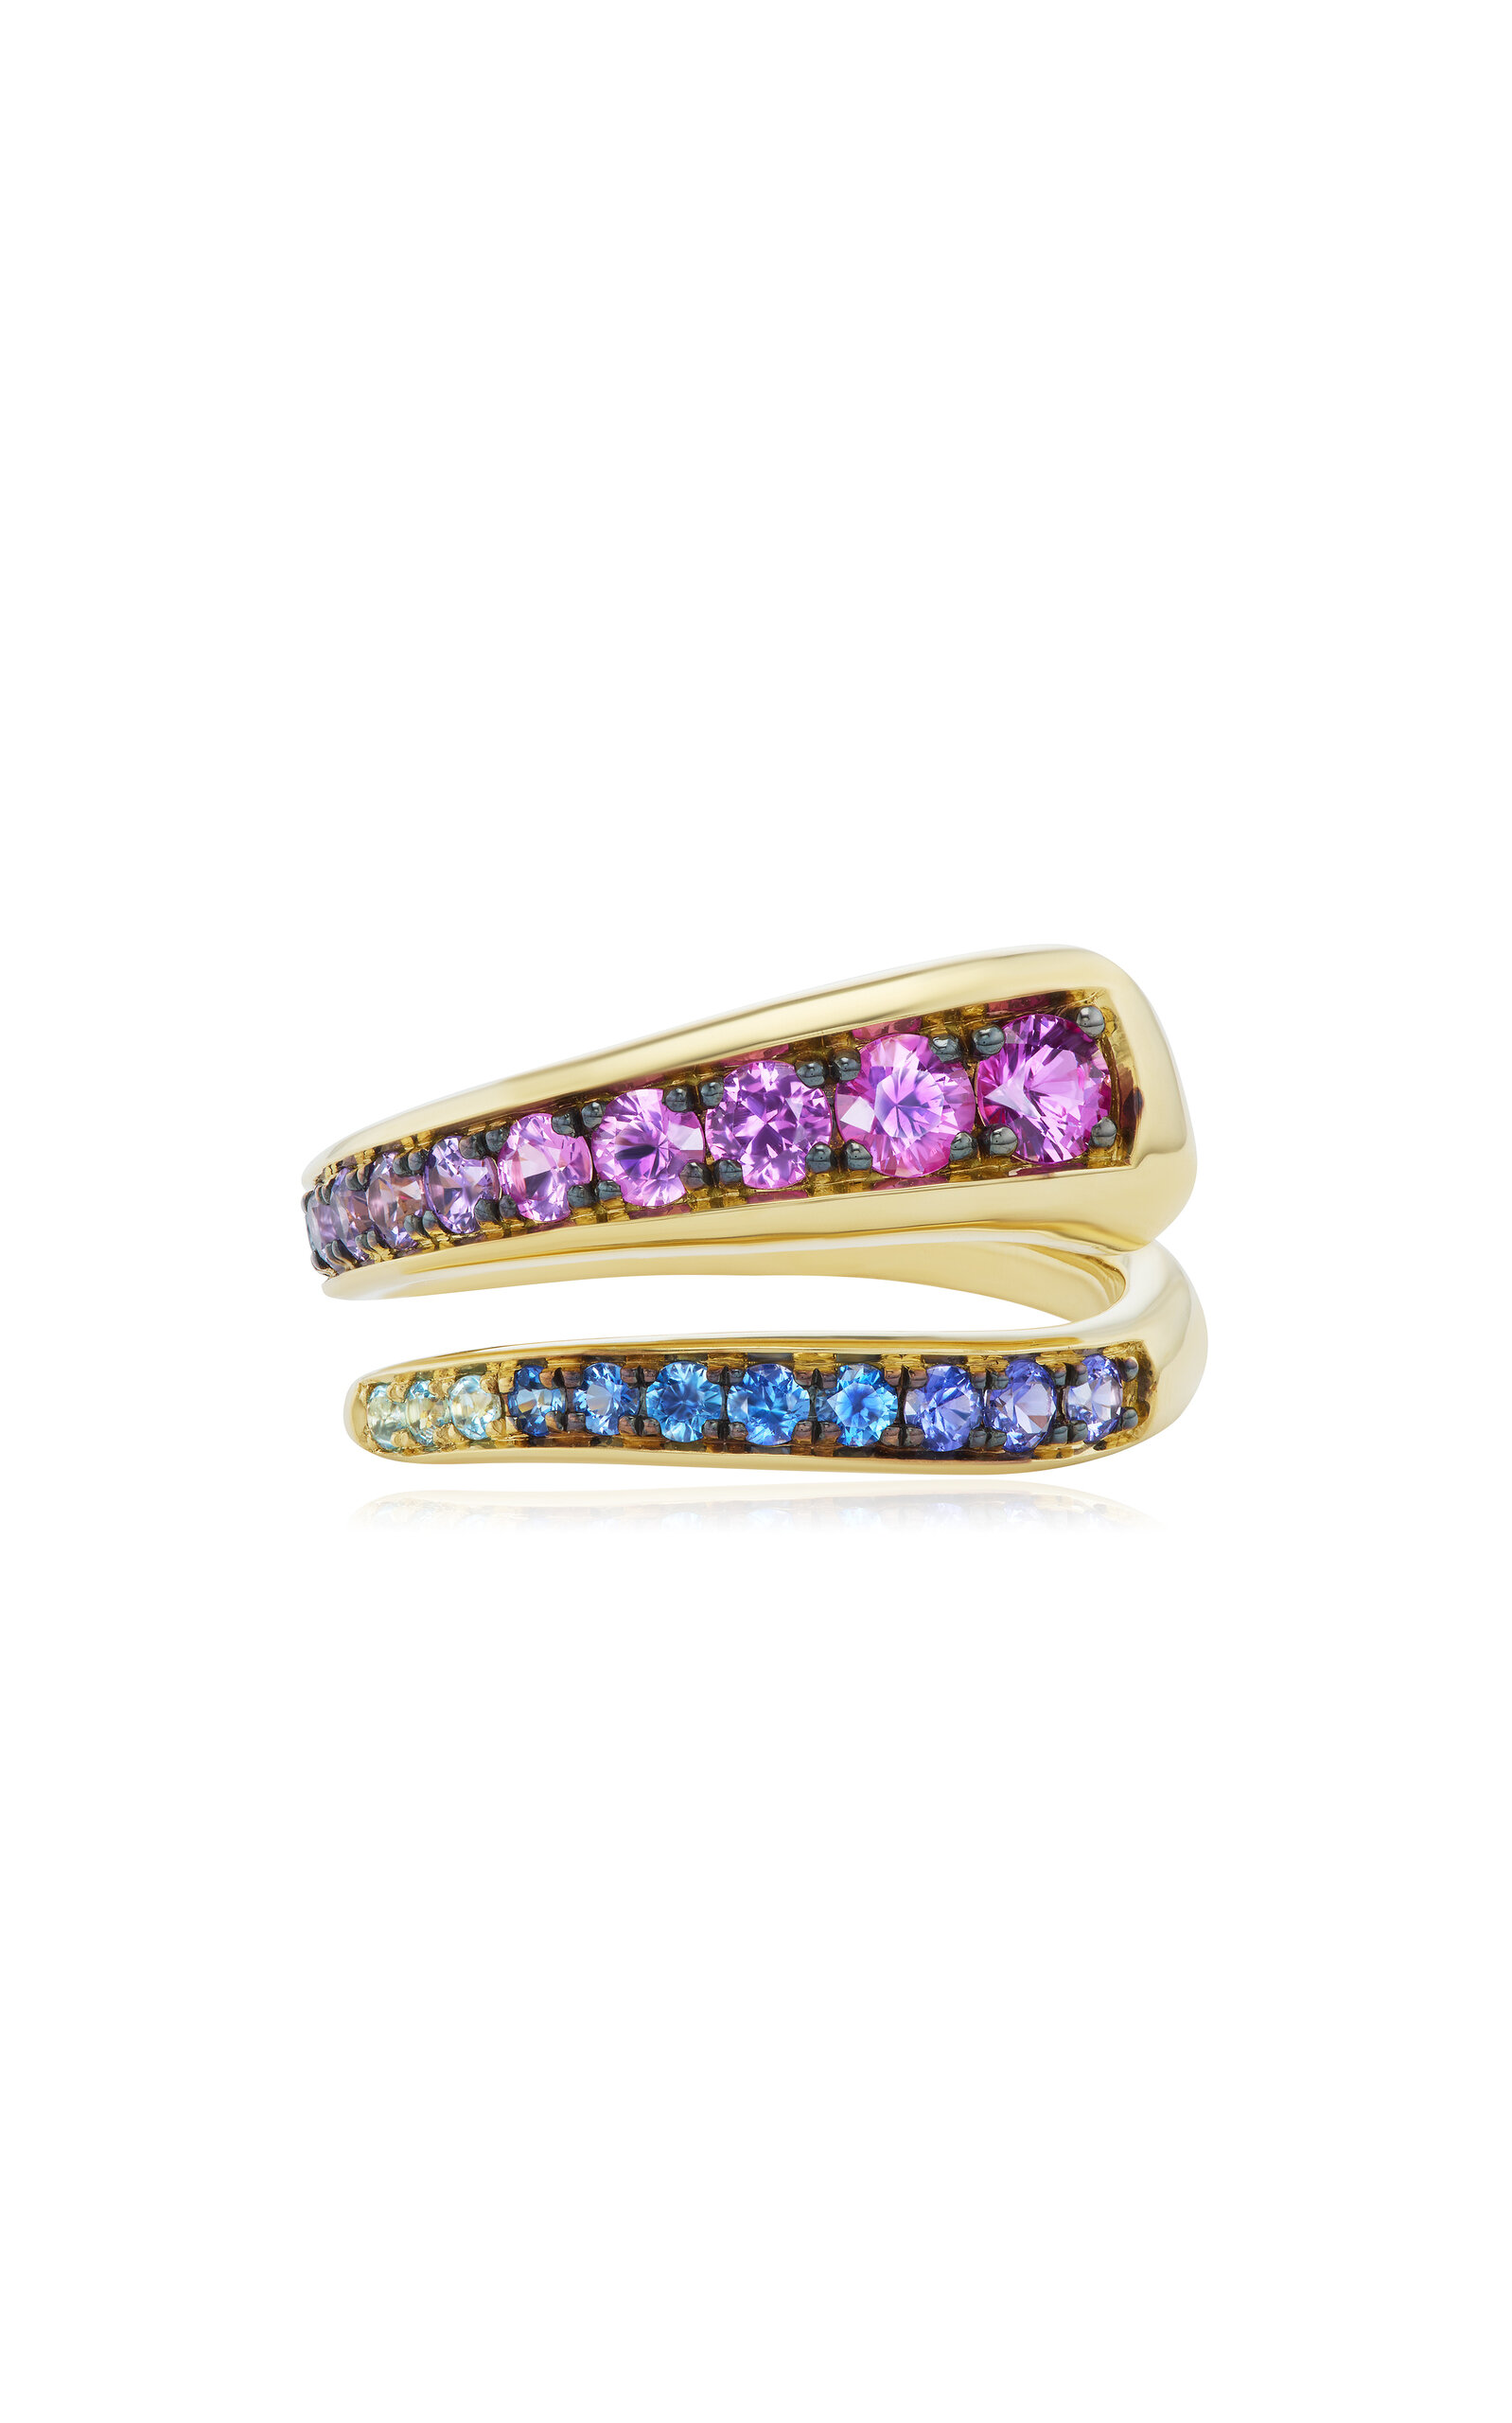 18K Yellow Gold; Sapphire; And Apatite Ring